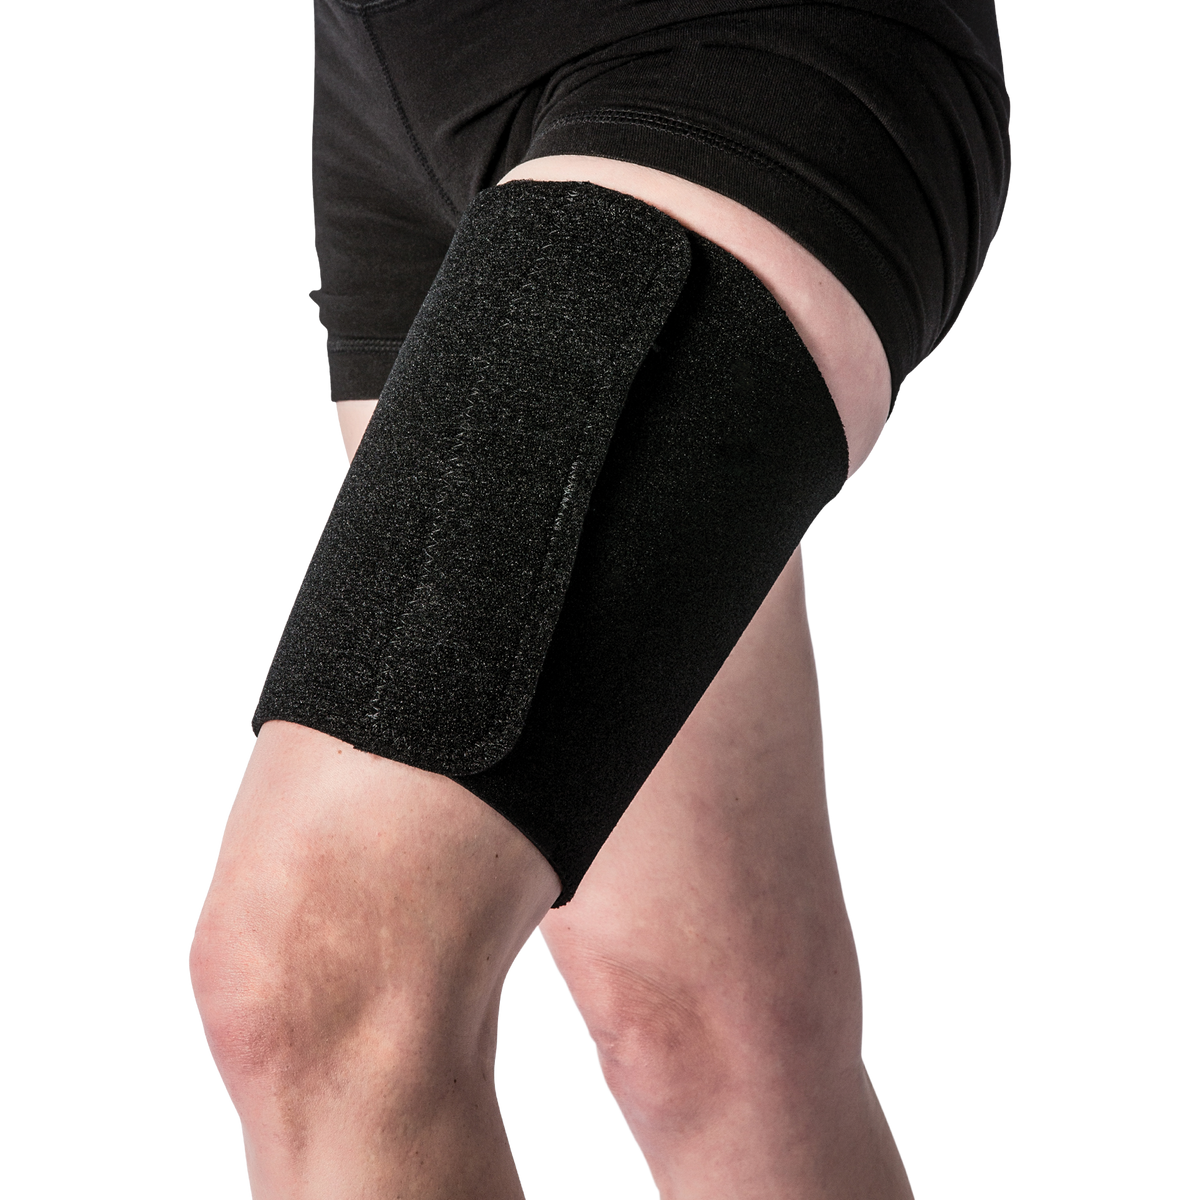 Knee / Thigh / Groin (Universal Large) Ice Pack & Ice Wrap